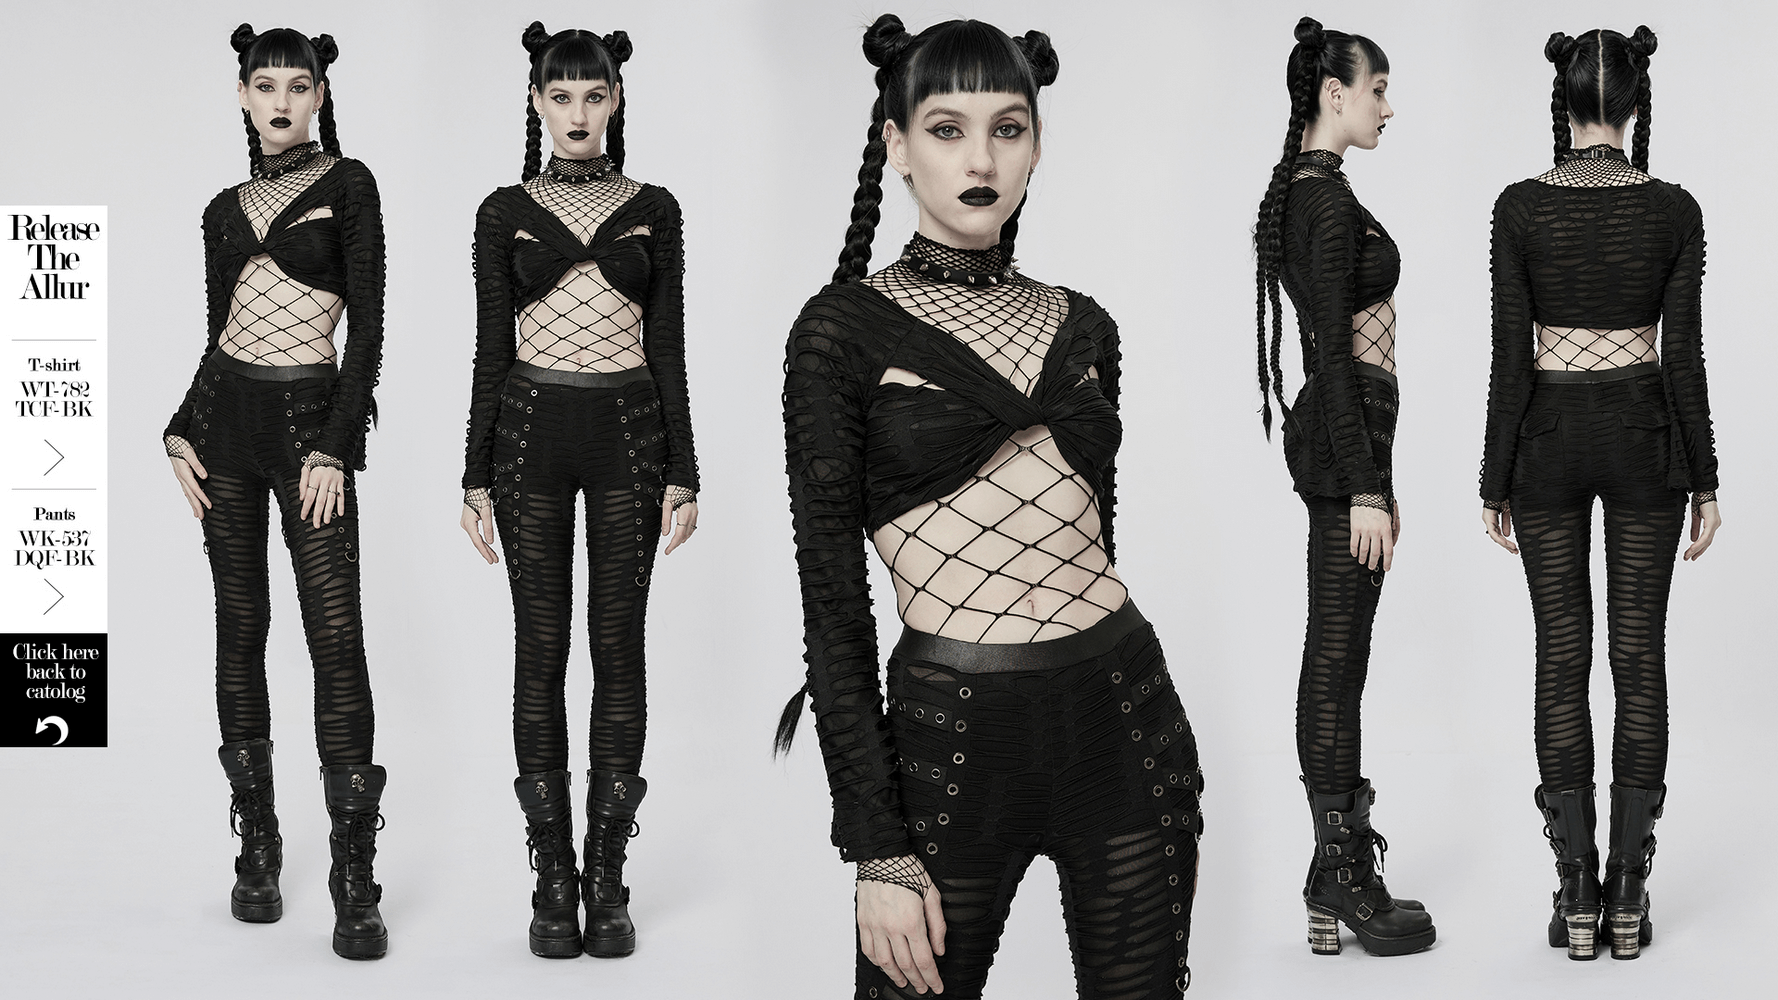 Chic Twist-Front Mesh Gothic Crop Top With Long Sleeves - HARD'N'HEAVY